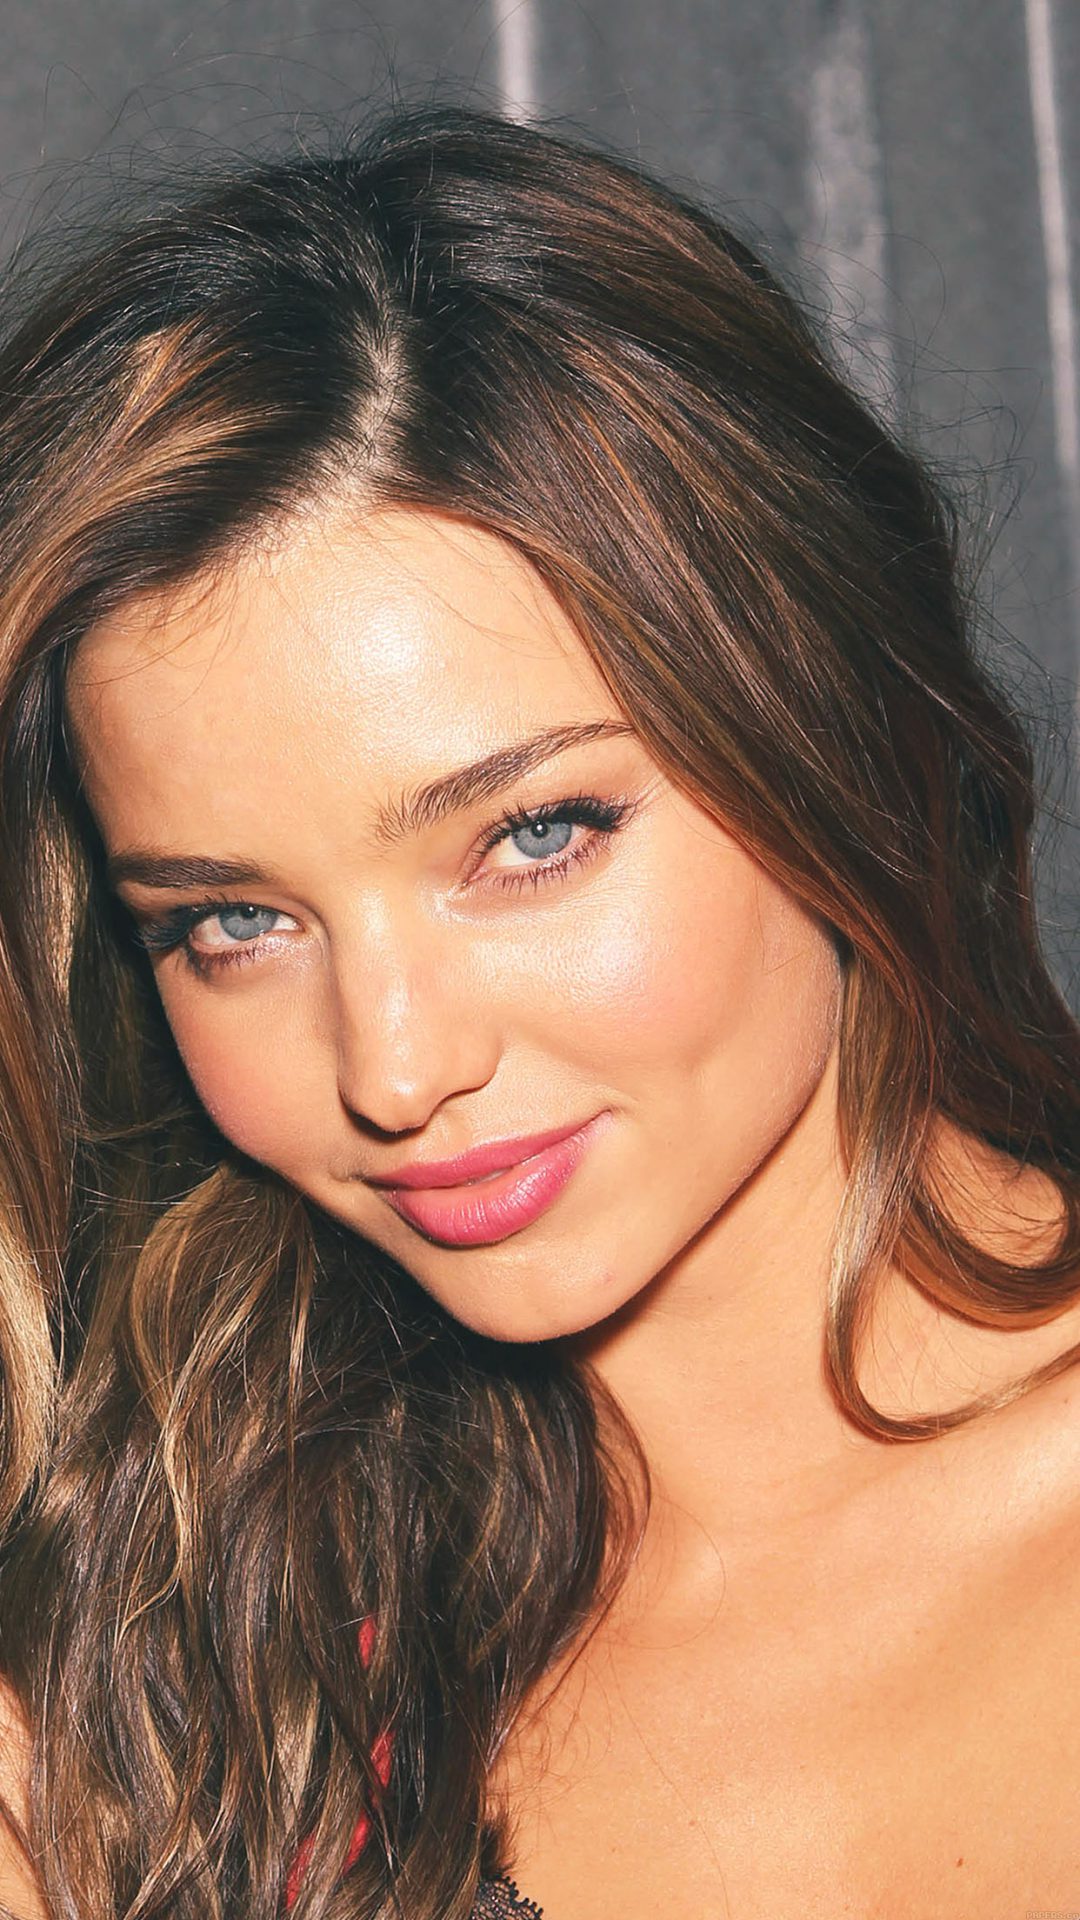 -New York, NY 11/7/12- The 2012 Victoria's Secret Fashion Show-Backstage Hair and Makeup-PICTURED: Miranda Kerr-PHOTO by: Marion Curtis/StarPix-MC_20538Startraks PhotoNew York, NYFor licensing please call 212-414-9464 or email sales@startraksphoto.com